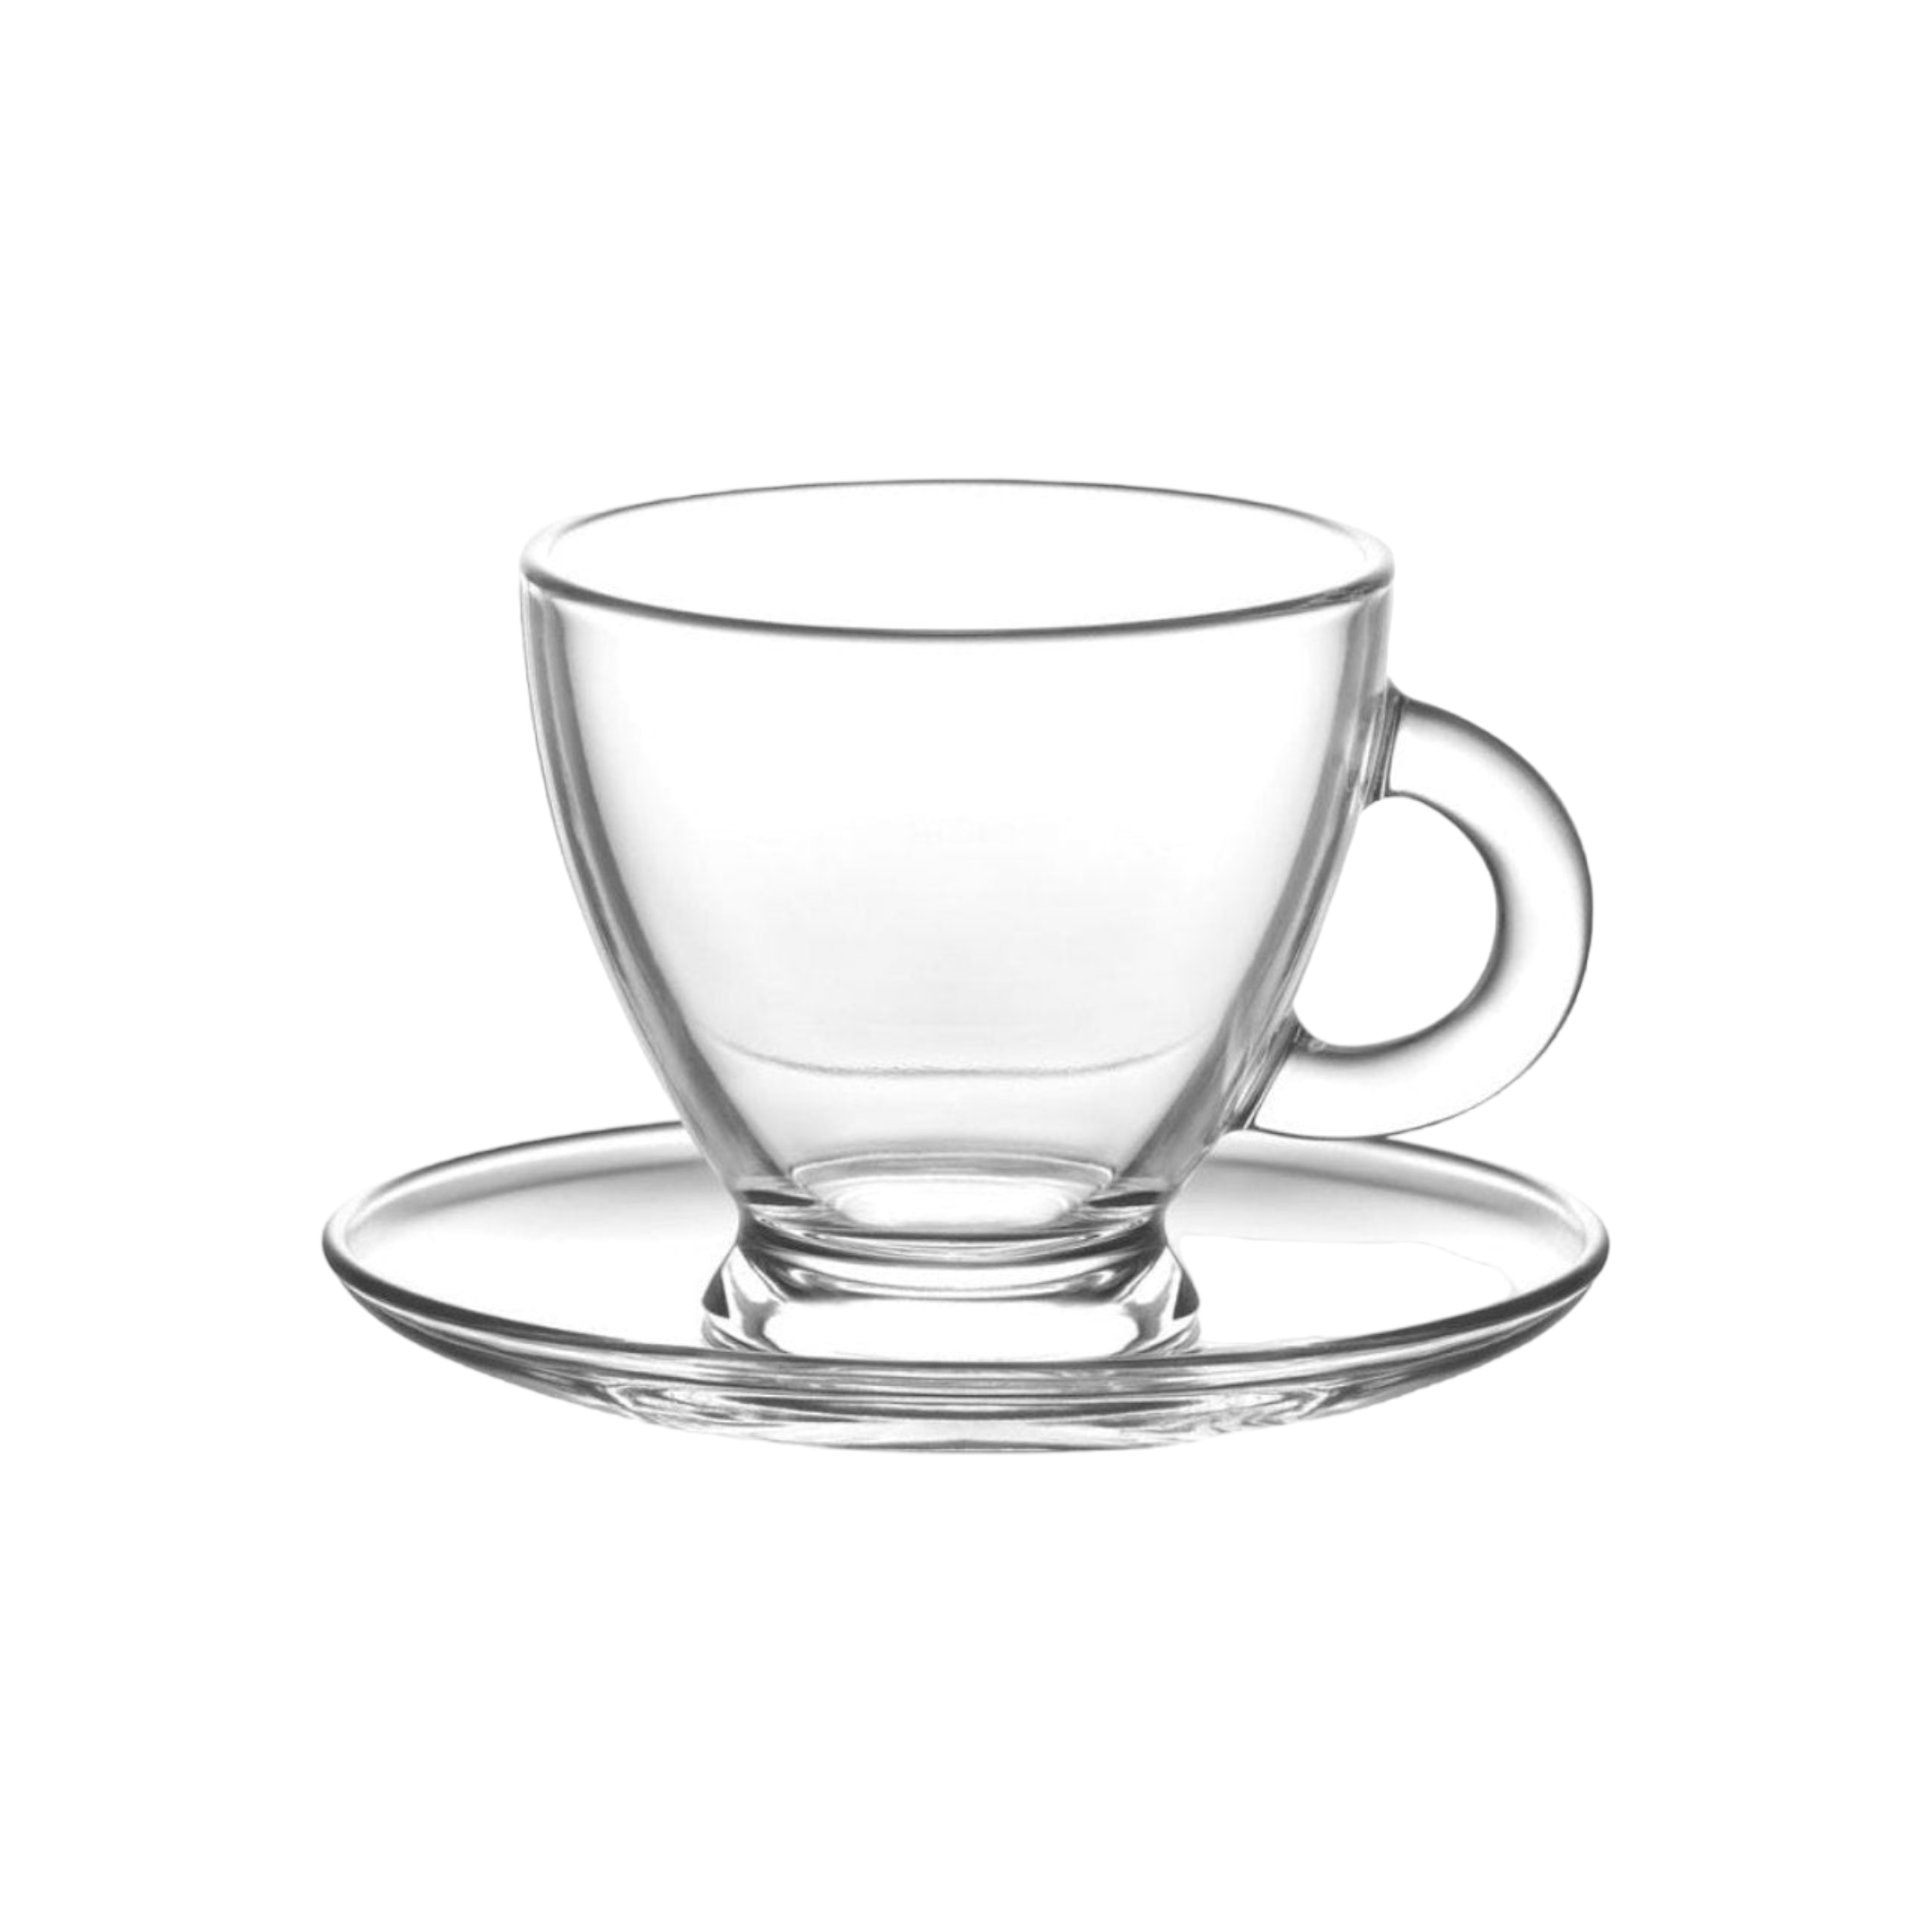 LAV Glass Cup and Saucer Set Roma 12pc SGN1860